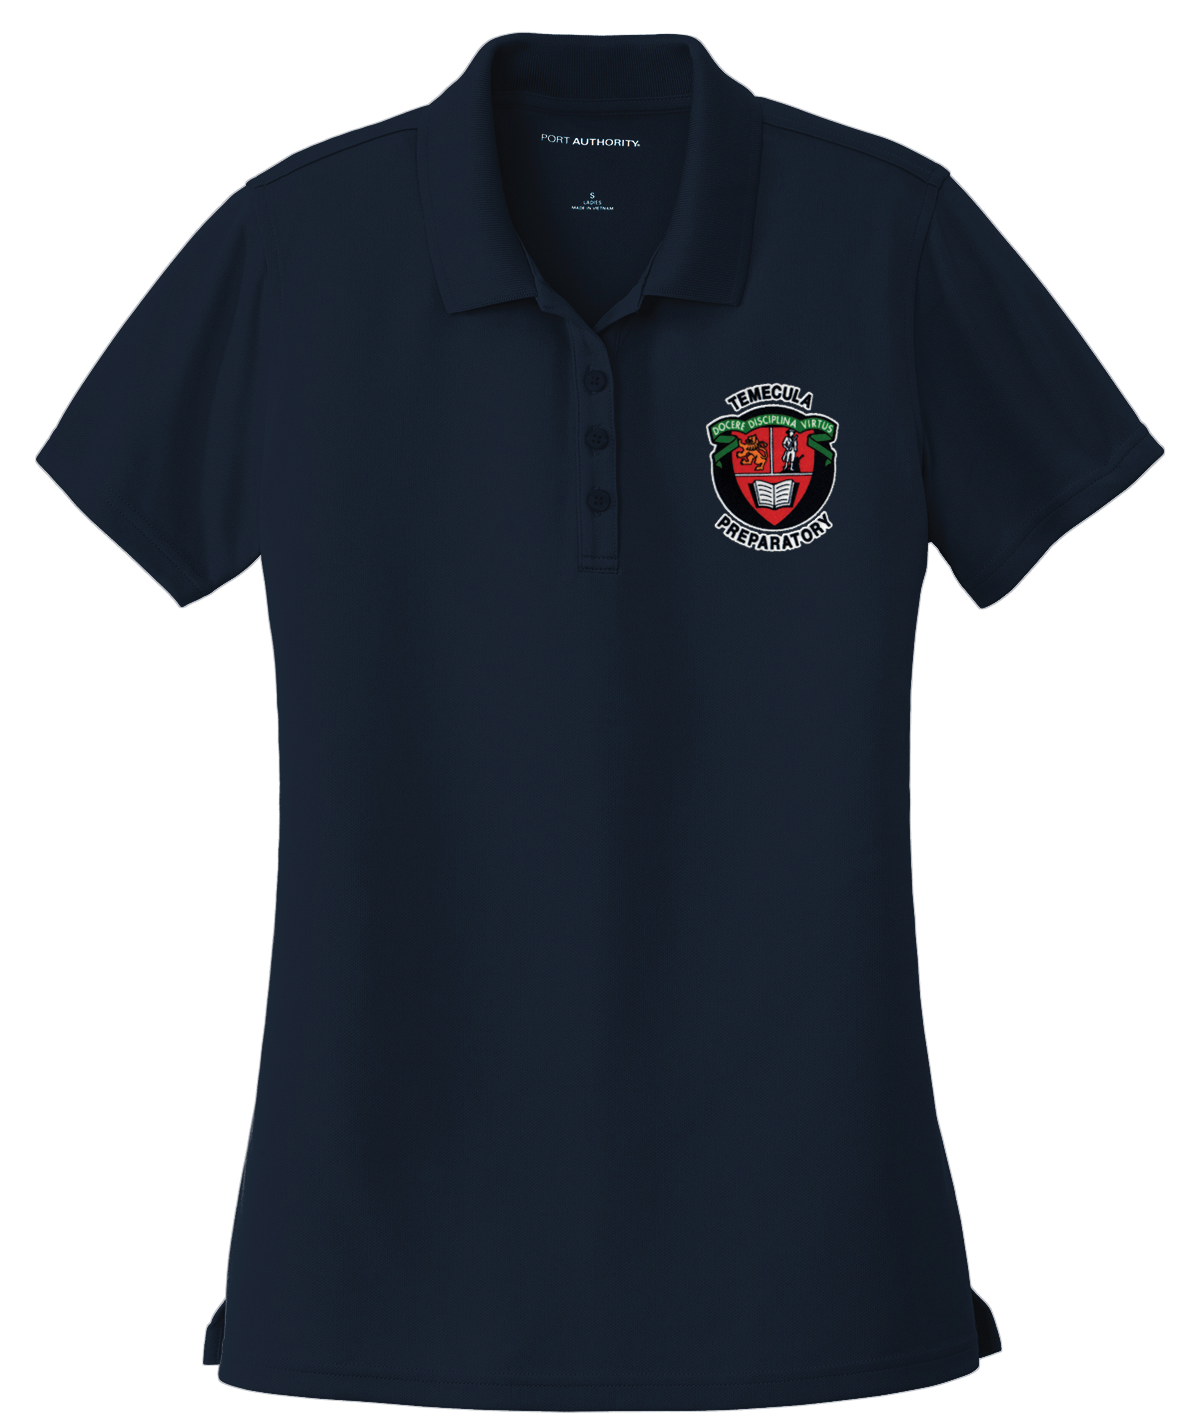 TPS Women's Dry-Fit Polos